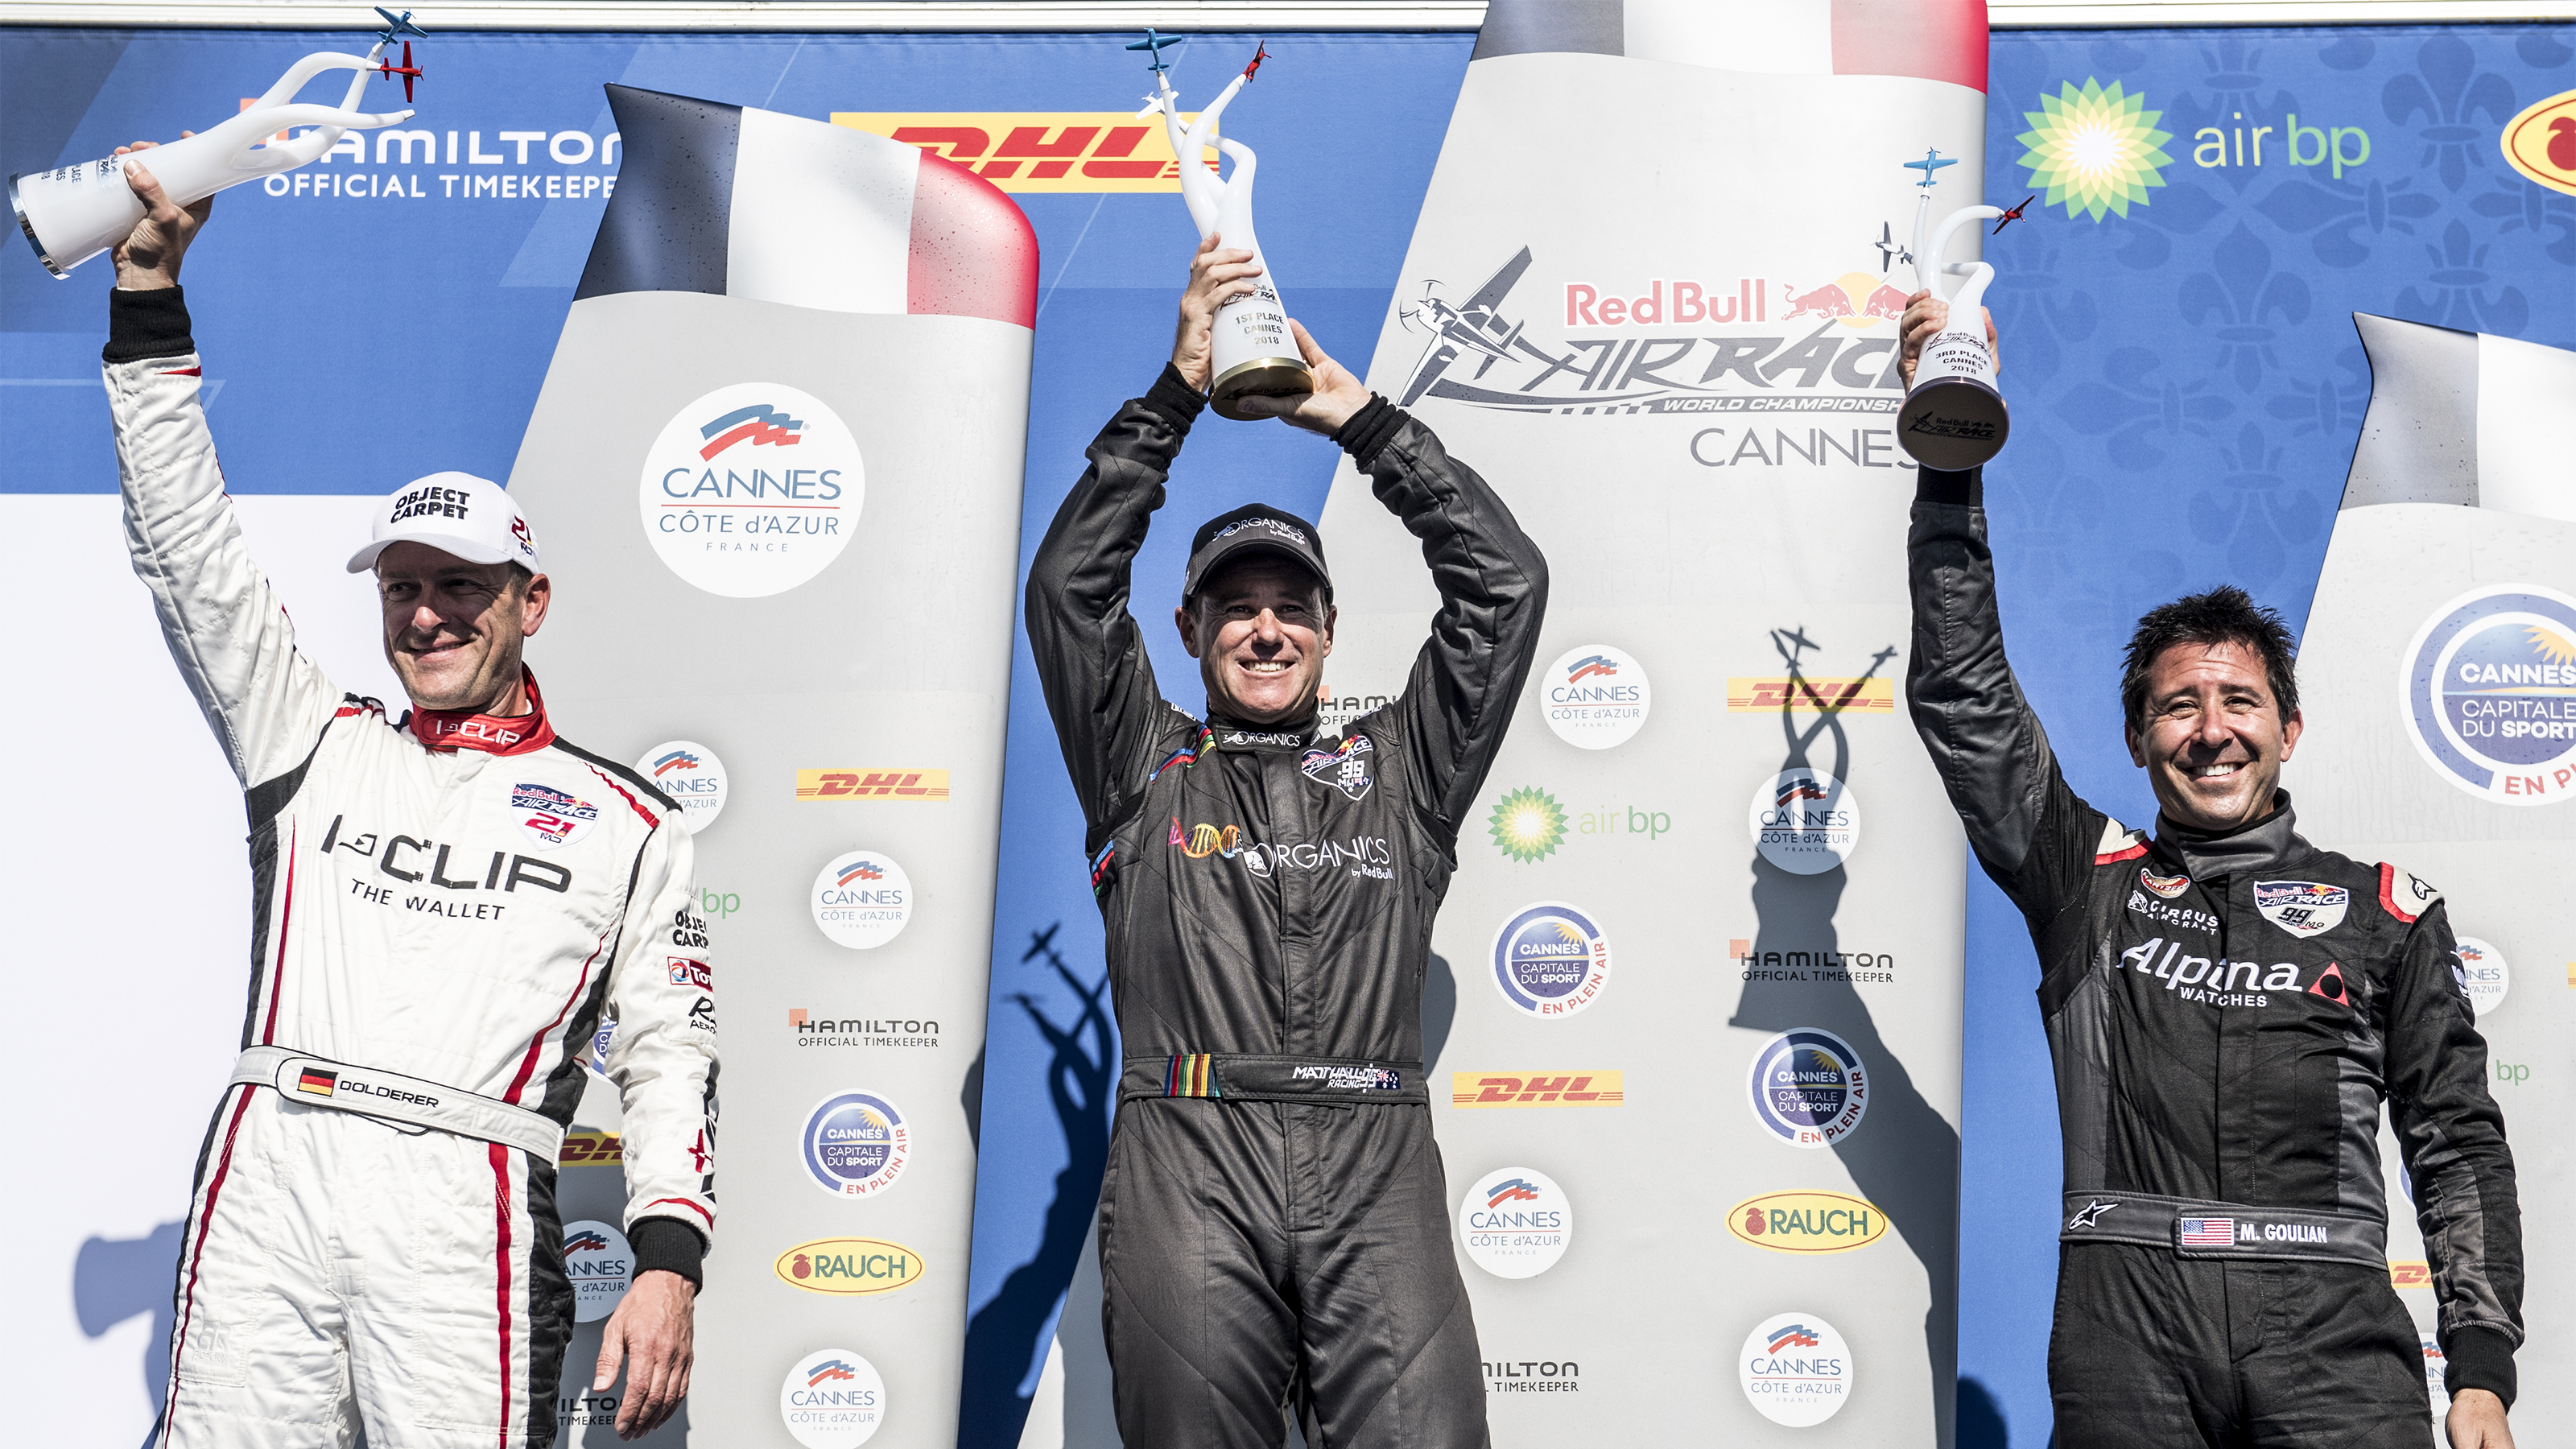 Matt Hall of Australia (center) celebrates with Matthias Dolderer of Germany (left) and Michael Goulian of the United States (right) during the award ceremony at the second round of the Red Bull Air Race World Championship in Cannes, France on April 22, 2018. Photo by Predrag Vuckovic /Red Bull Content Pool.